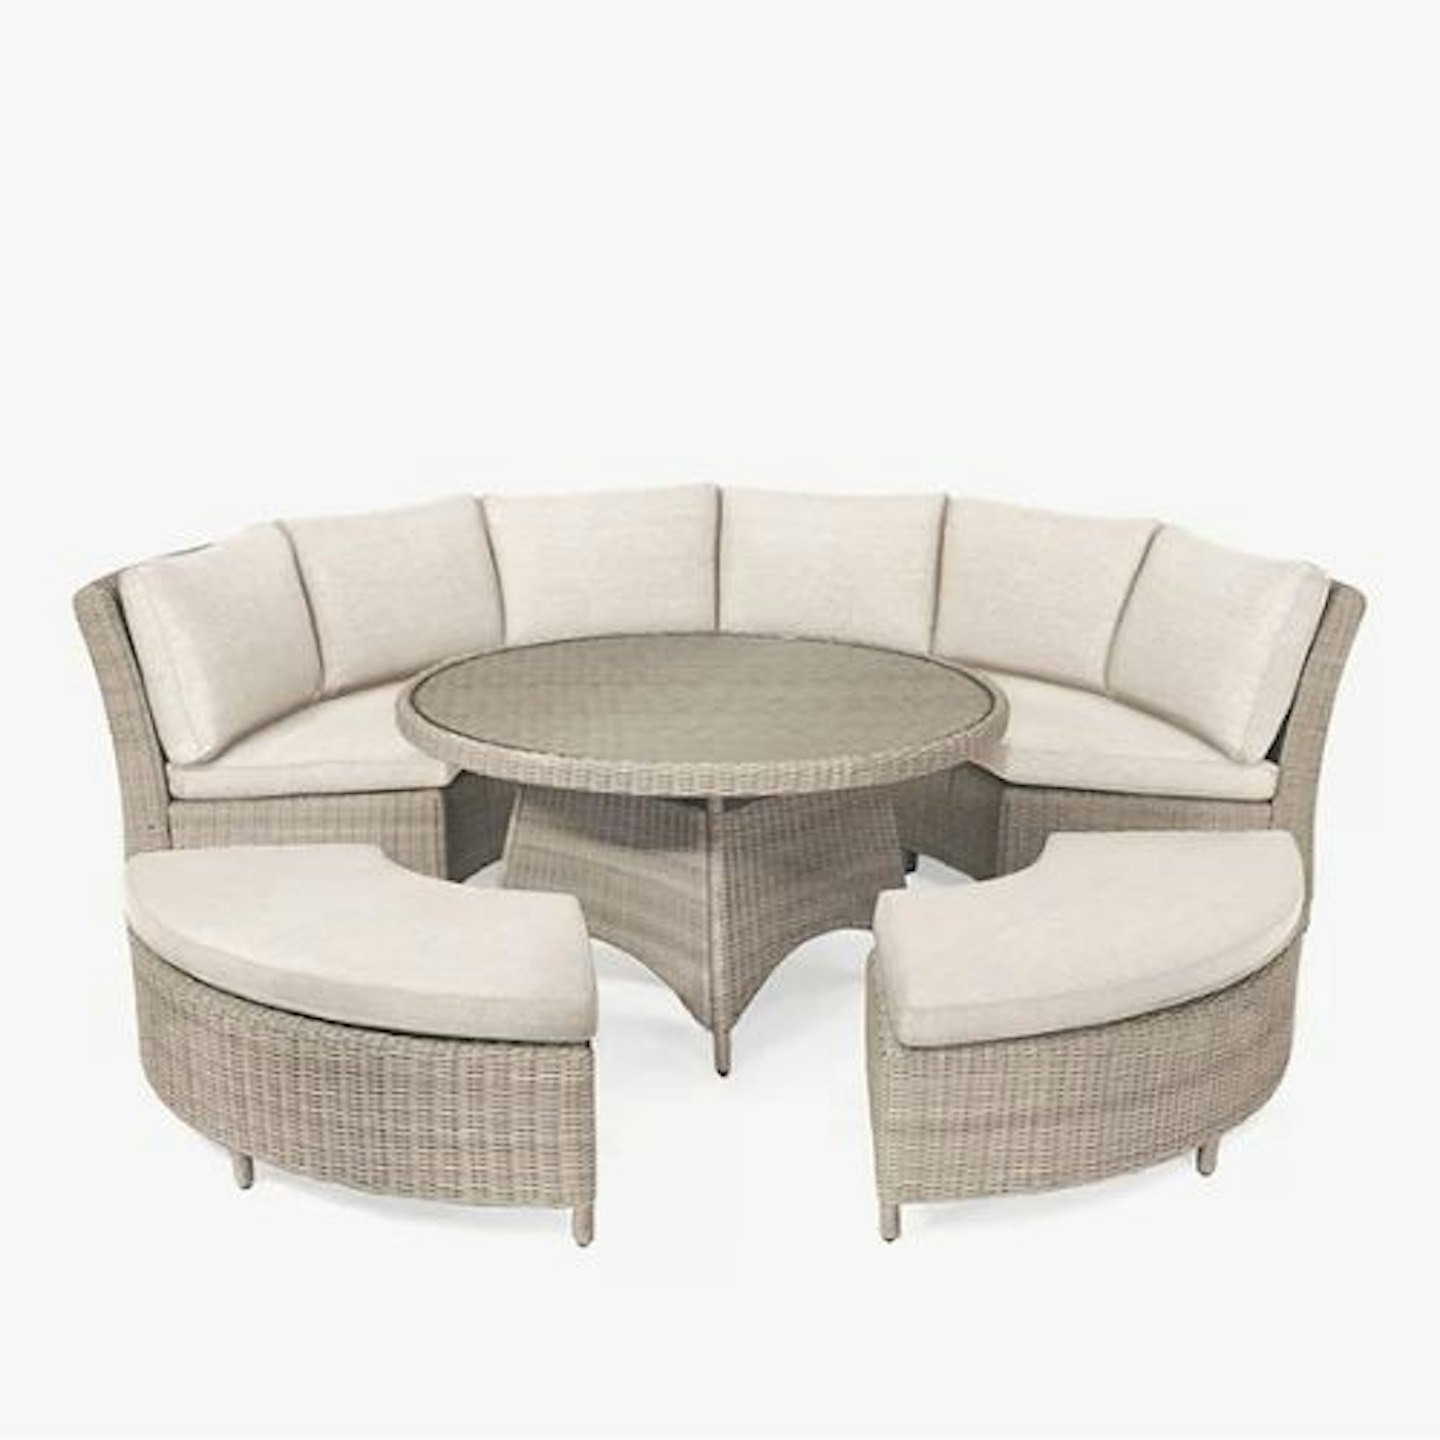 KETTLER Palma 8-Seater Round Garden Dining Table and Chairs Set, Oyster/Stone